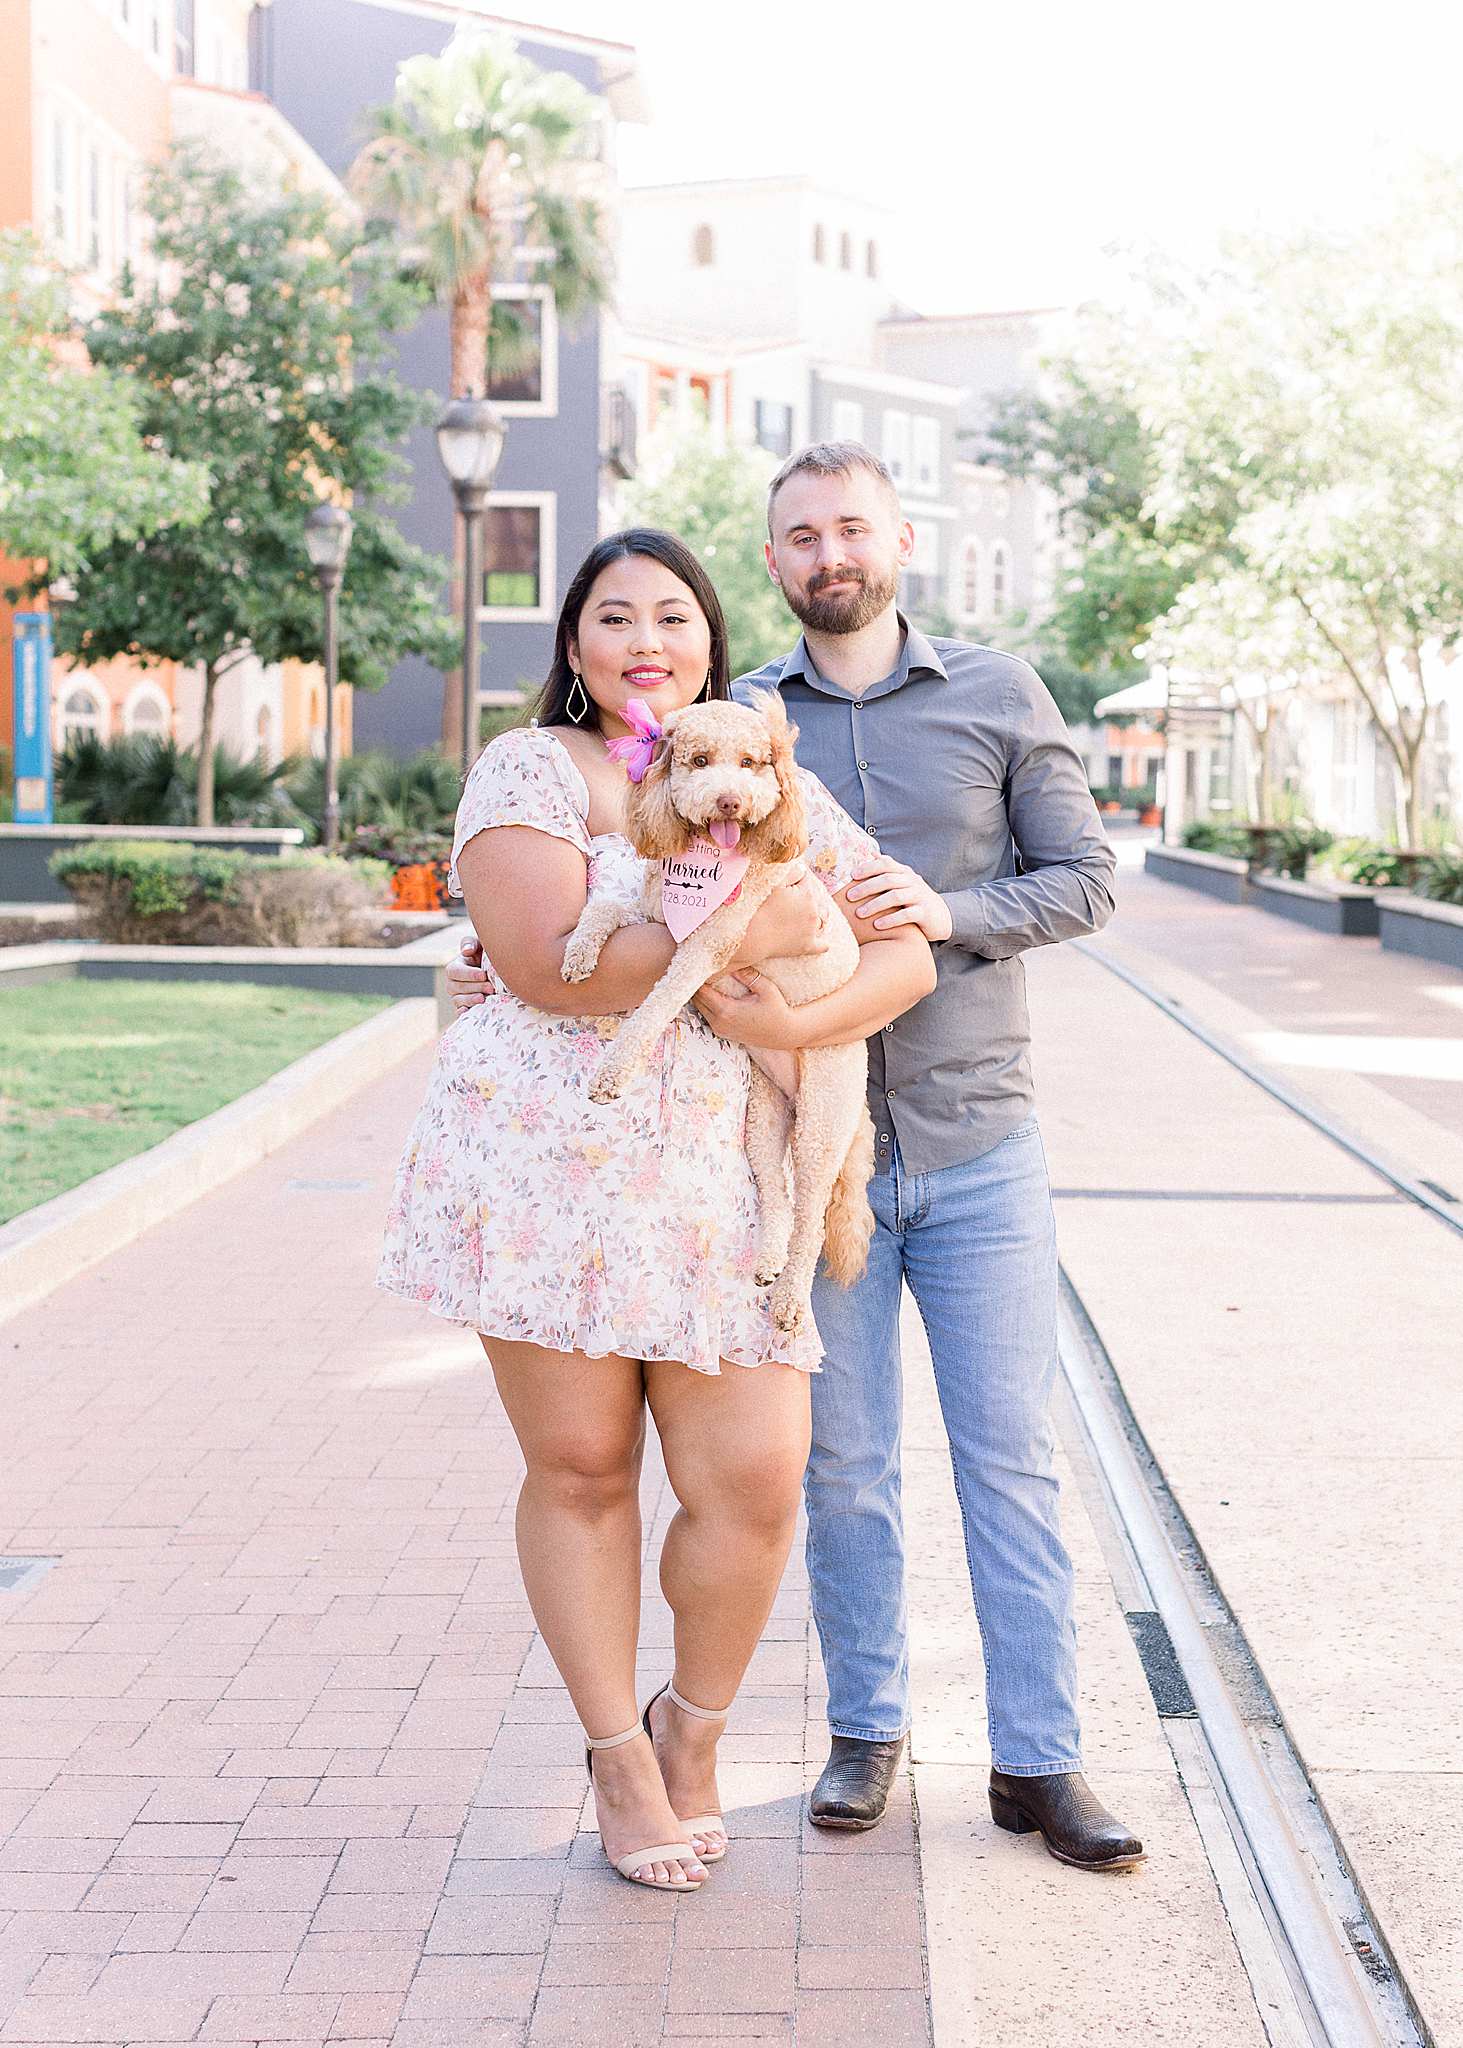 Goldendoodle at Engagement Session, San Antonio Photographer, Anna Kay Photography